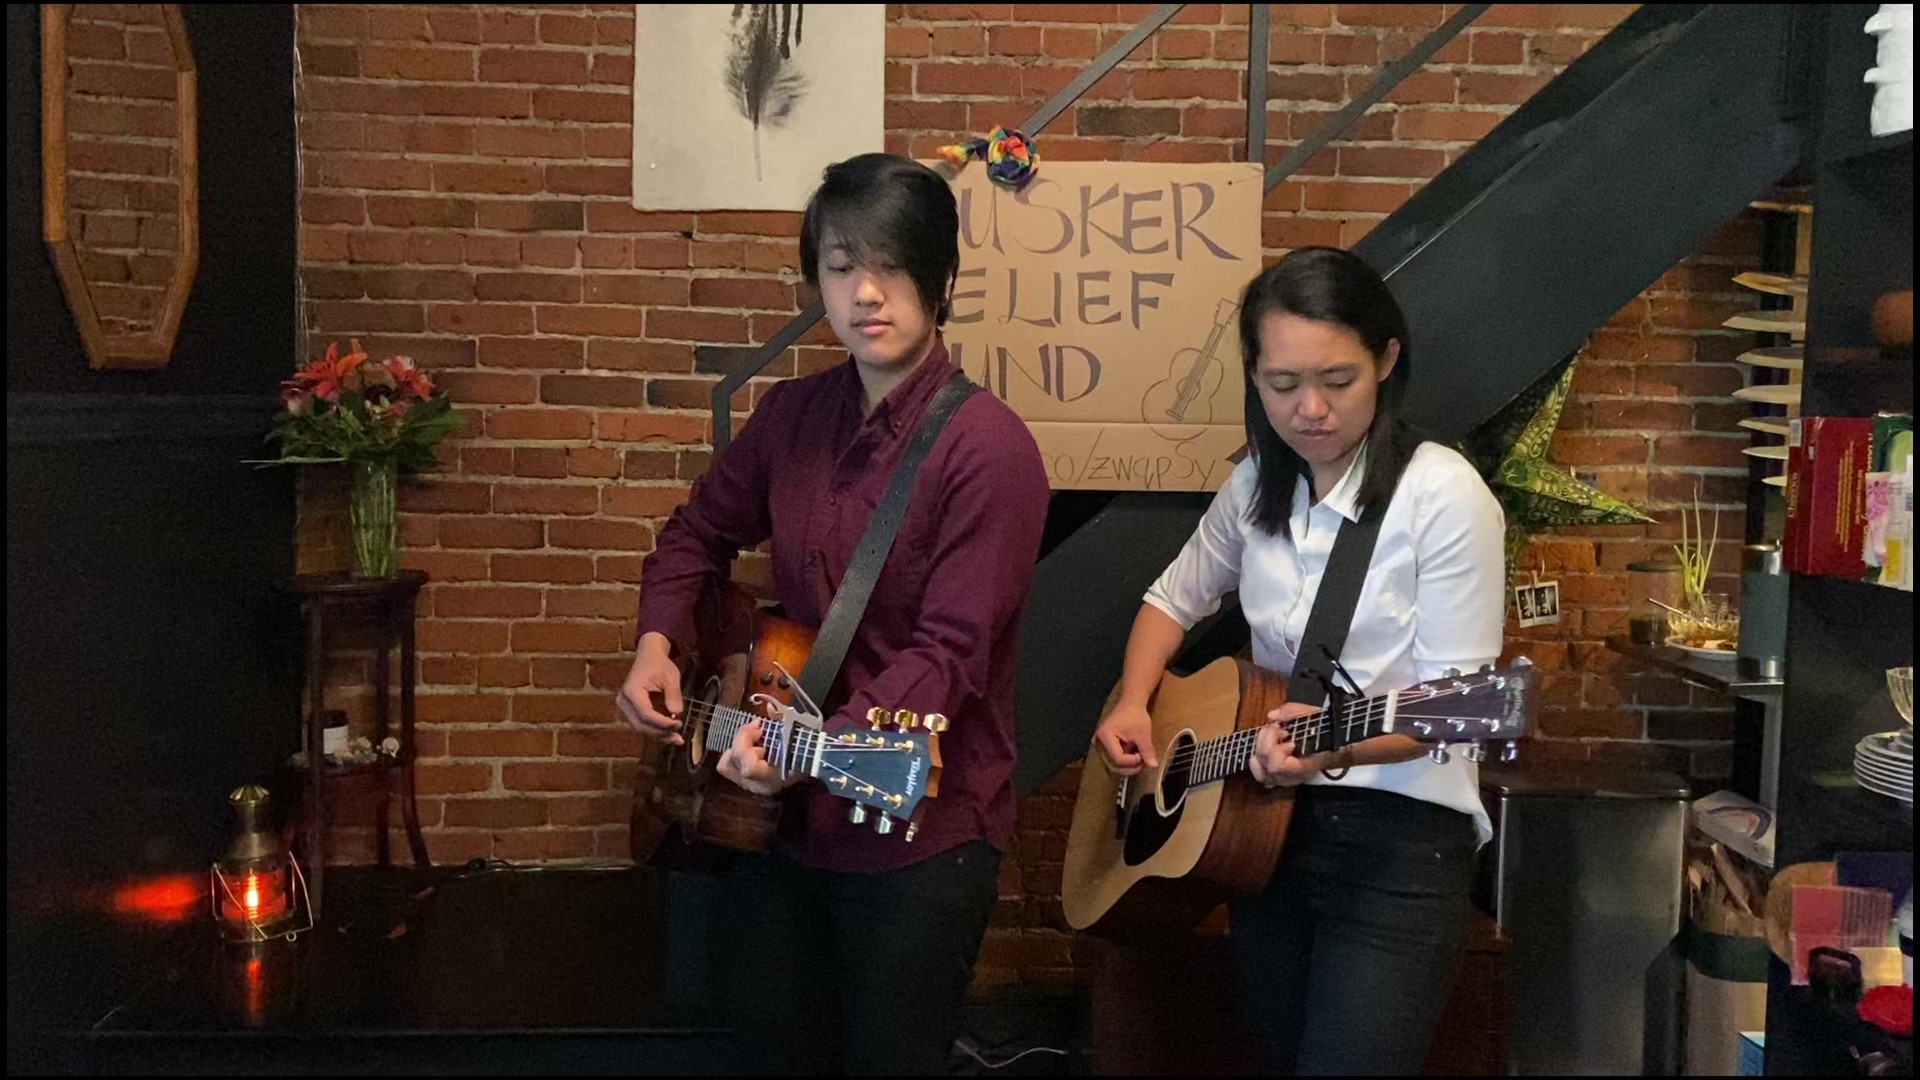 Due to COVID-19, Pike Place Market buskers can no longer play at the market. That's why two buskers set up a fundraiser to help their fellow performers.